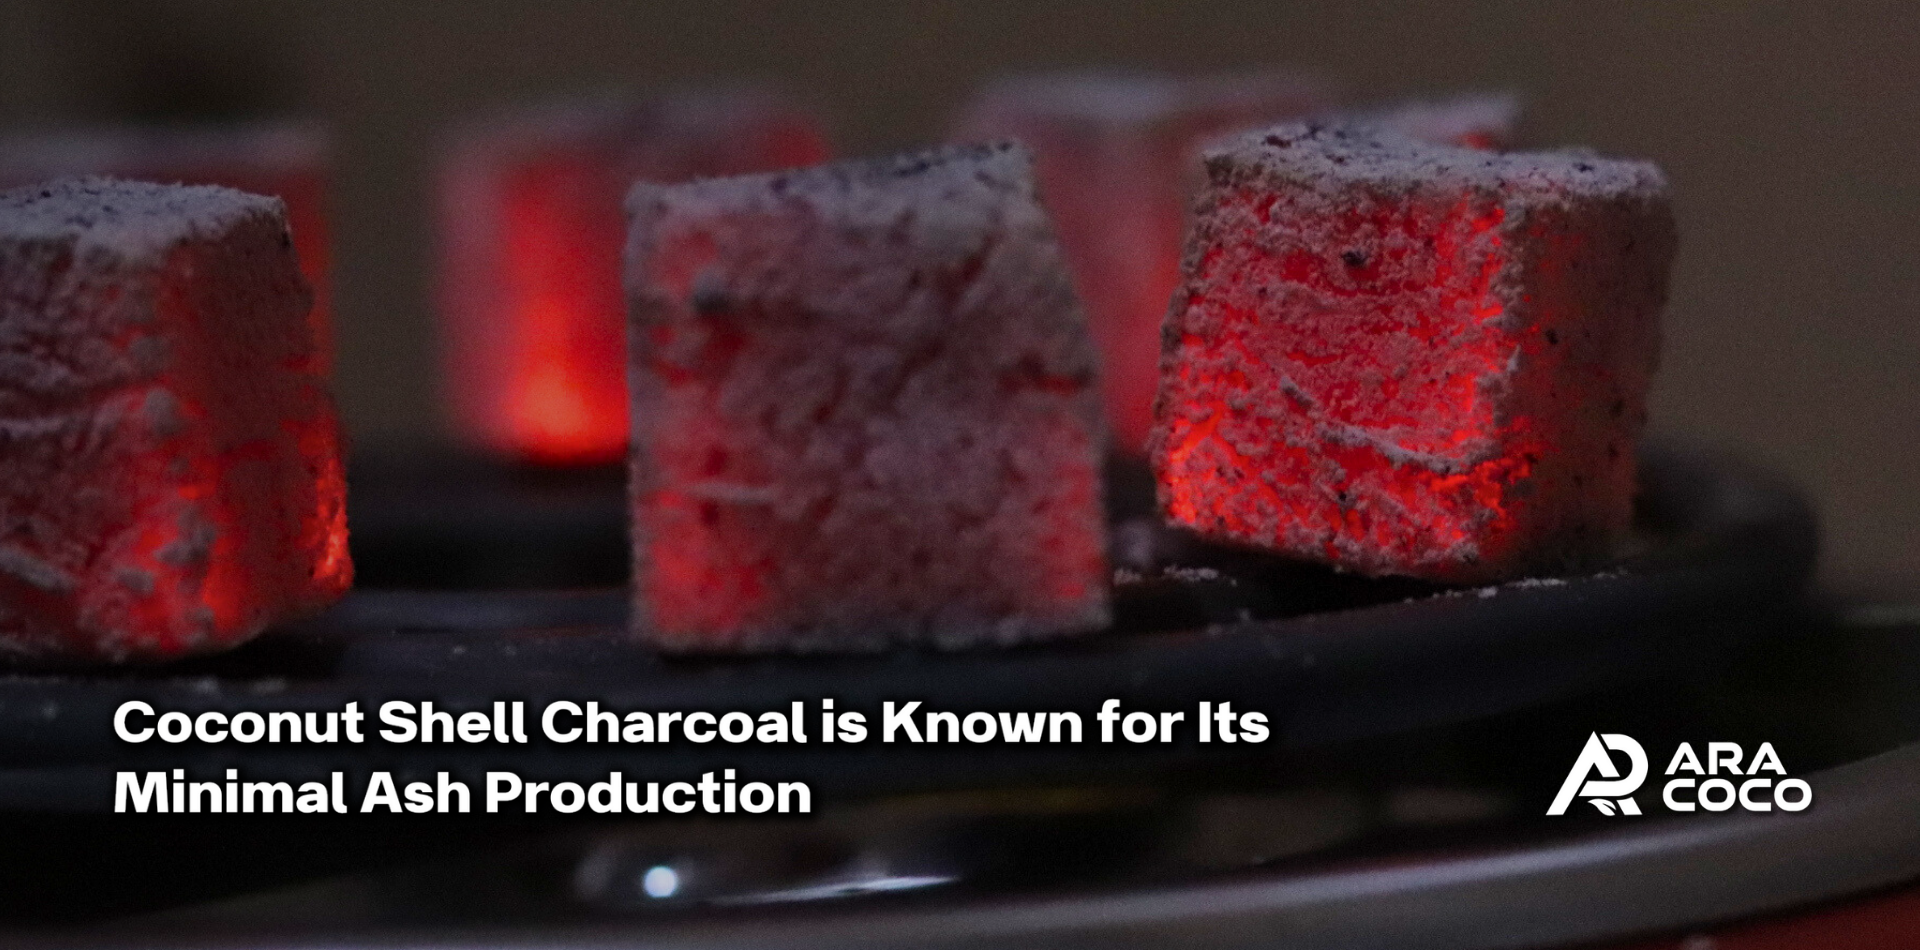 Coconut shell charcoal is known for its minimal ash production.